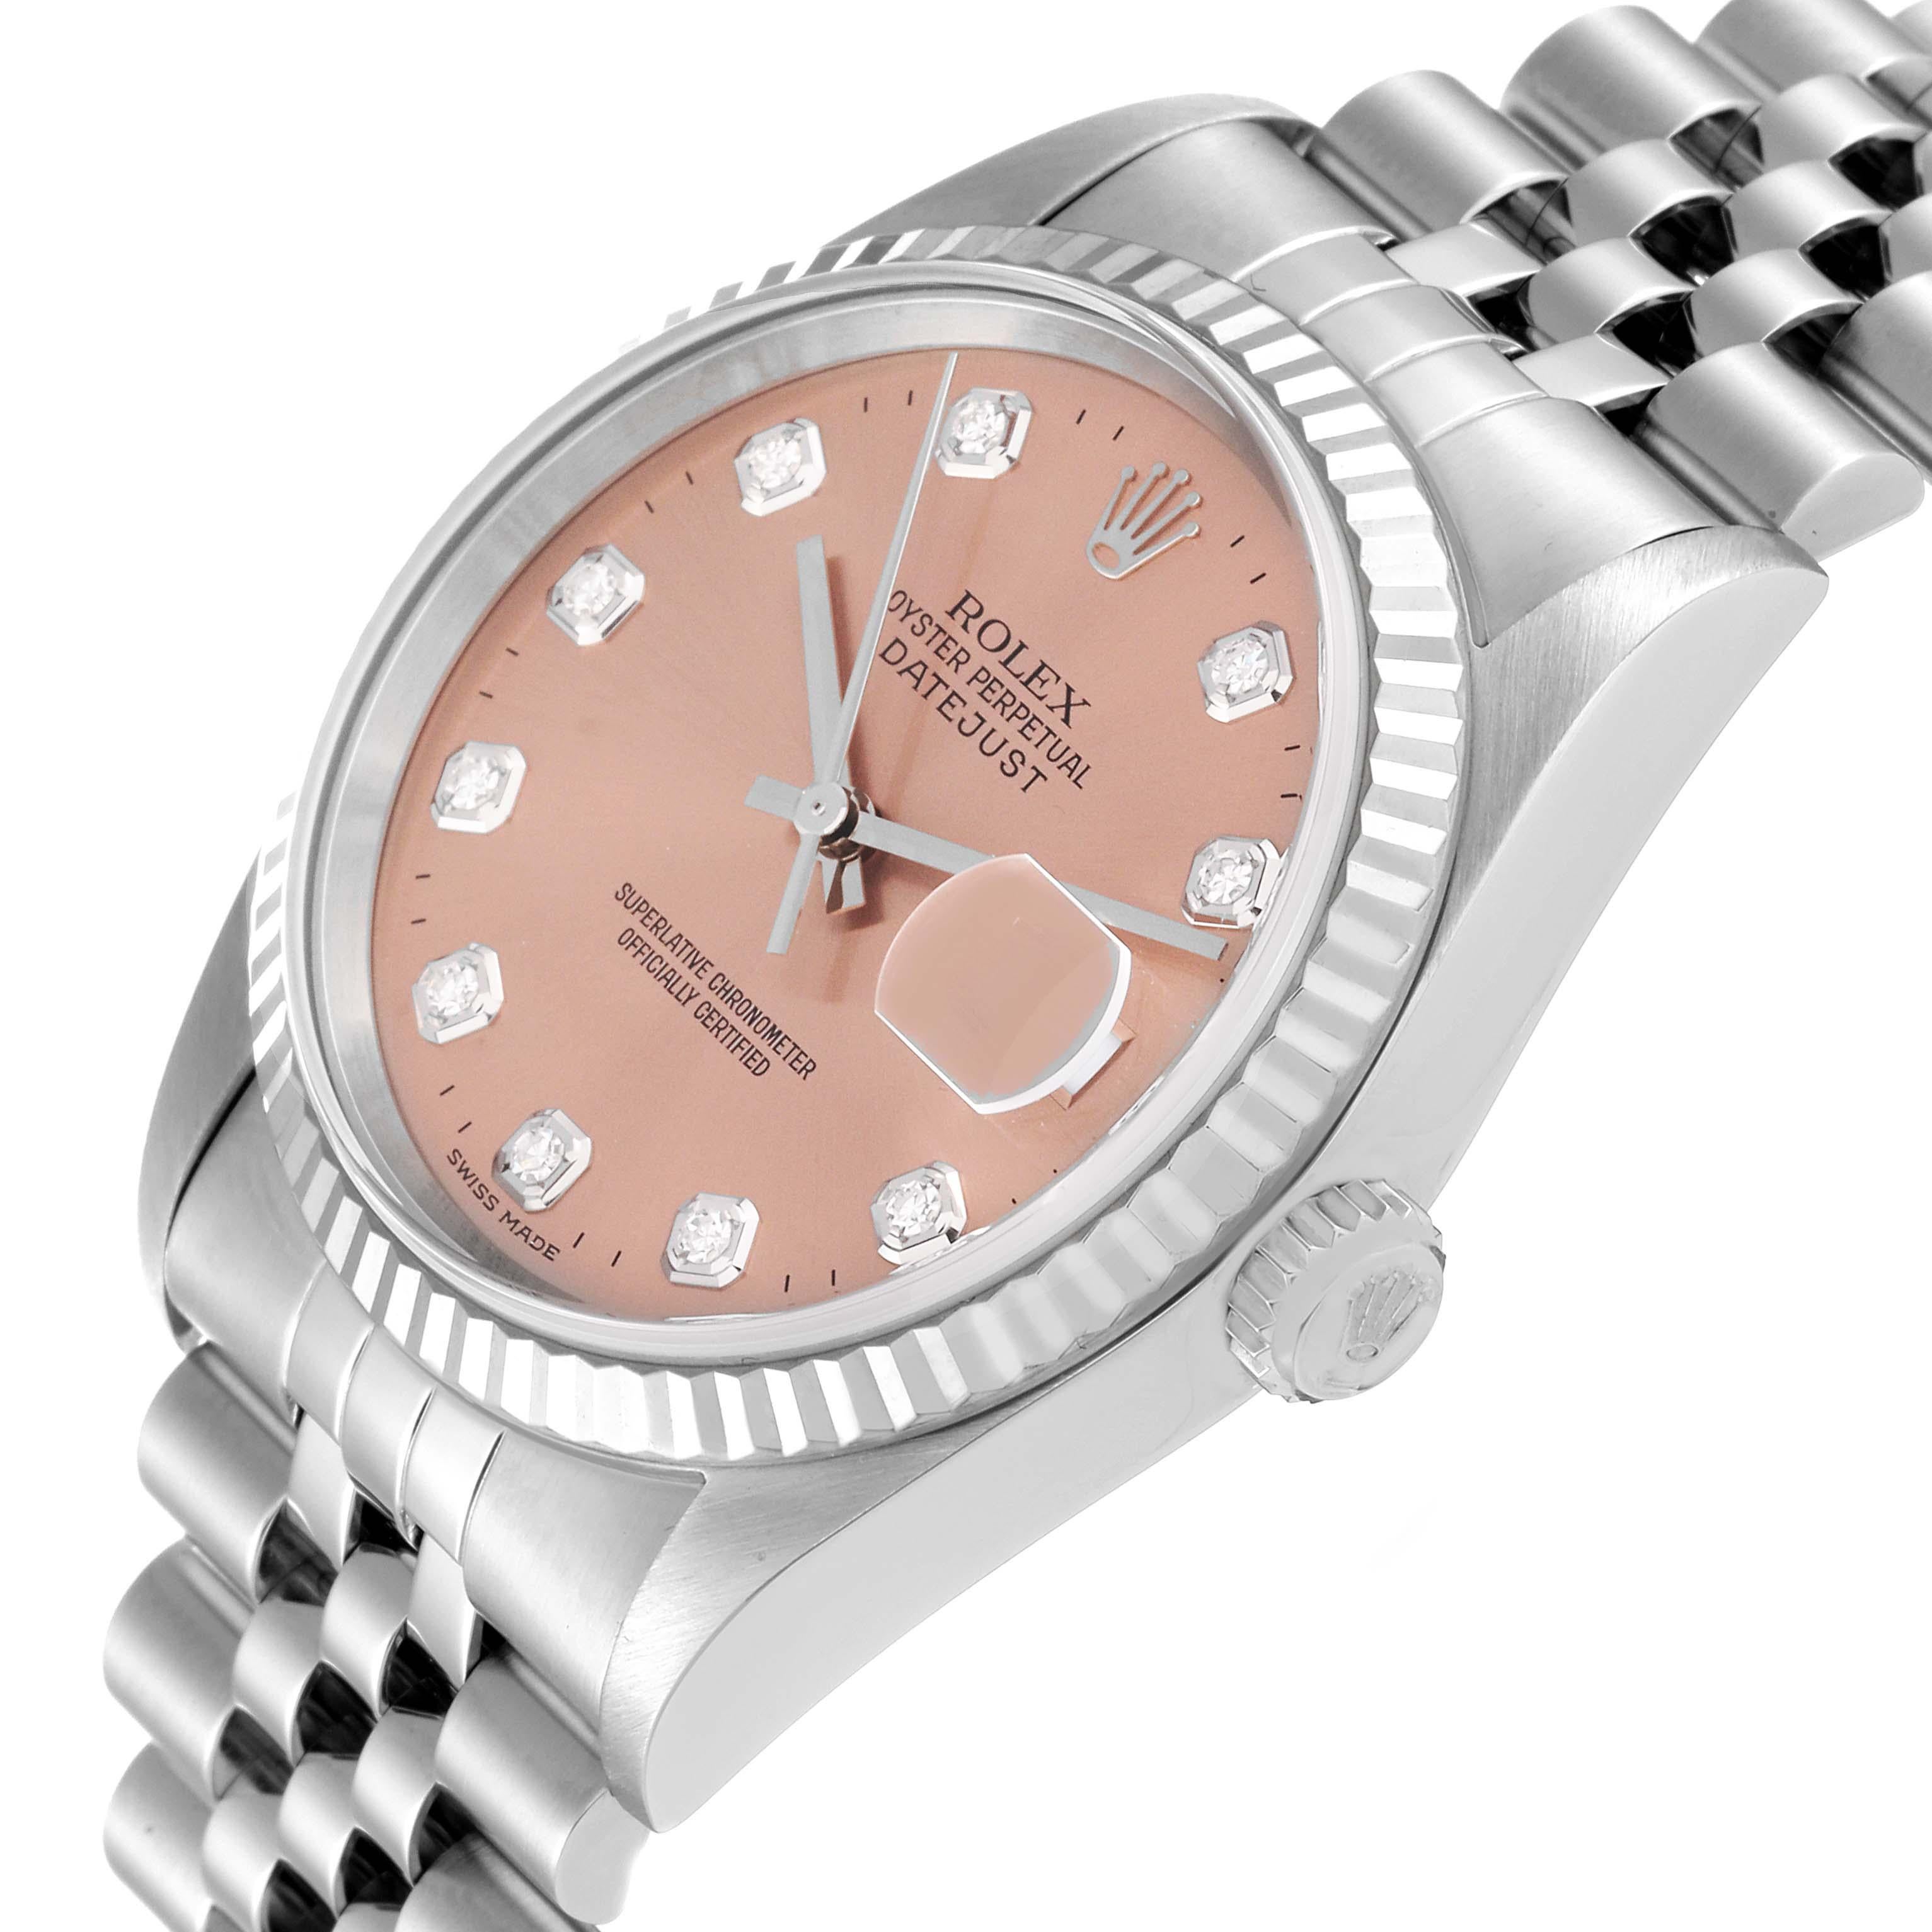 Rolex Datejust Steel White Gold Salmon Diamond Dial Mens Watch 16234 For Sale 5